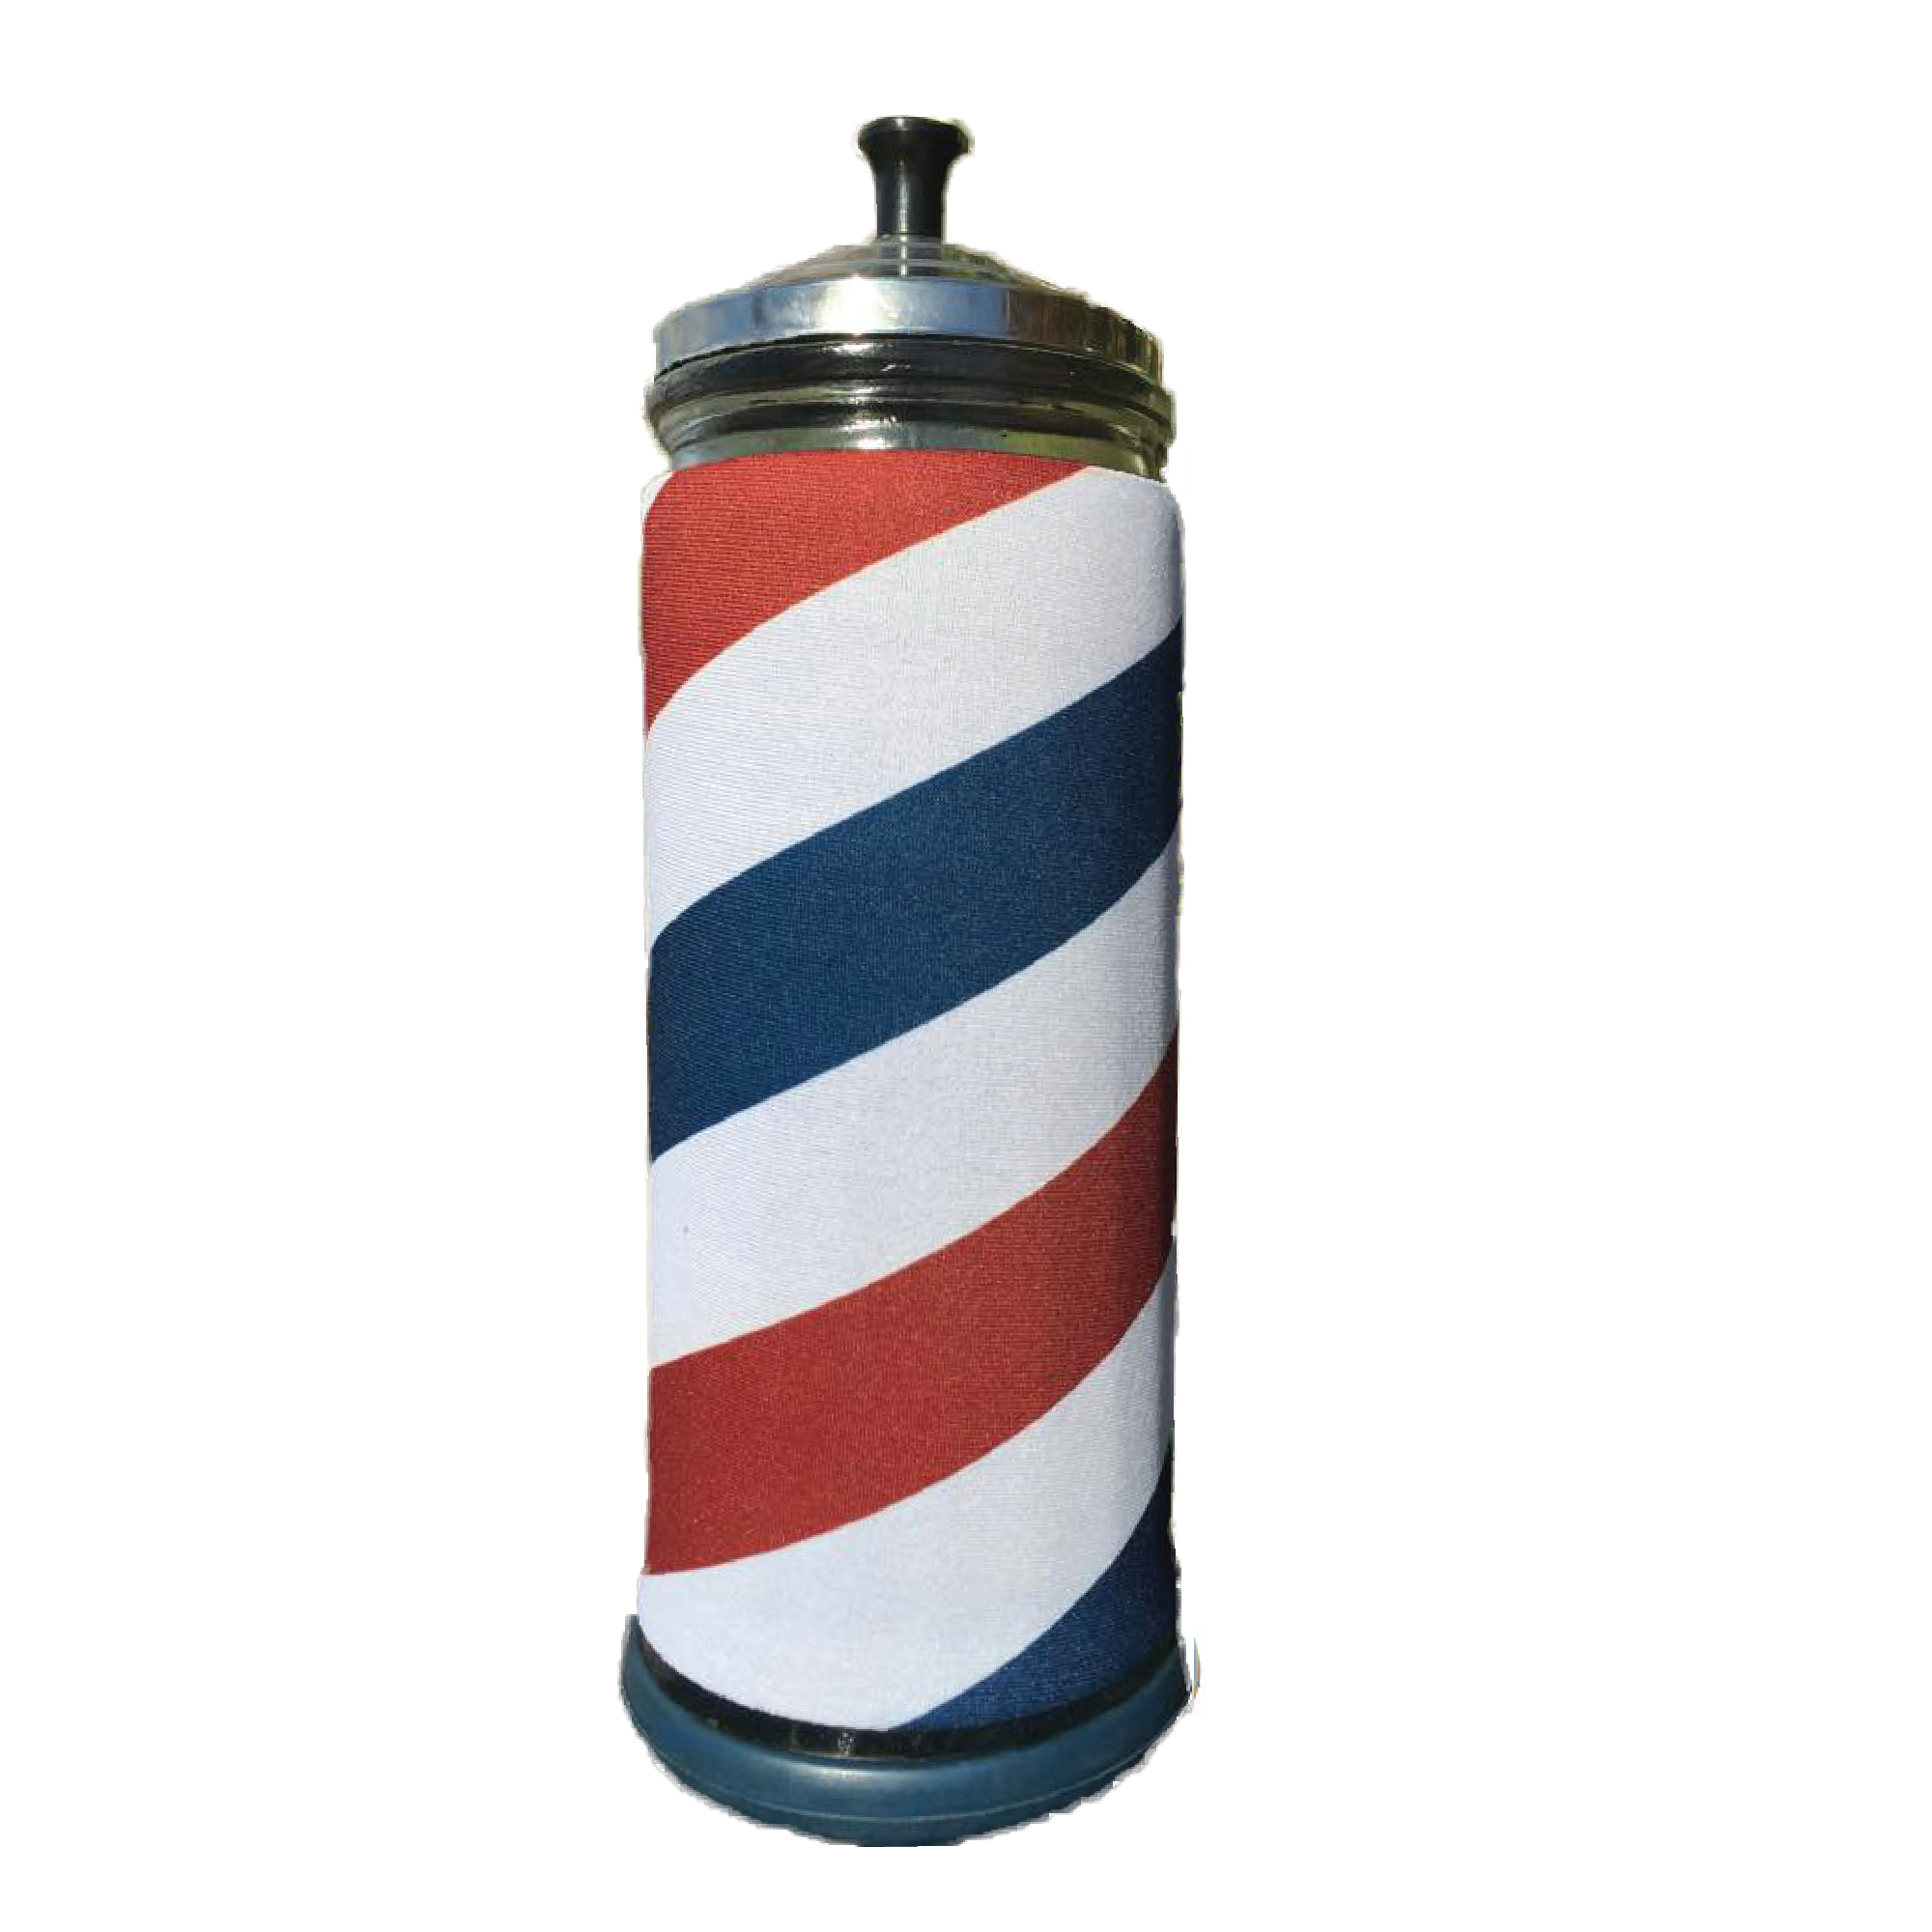 Barber Pole – Shorn Provisions